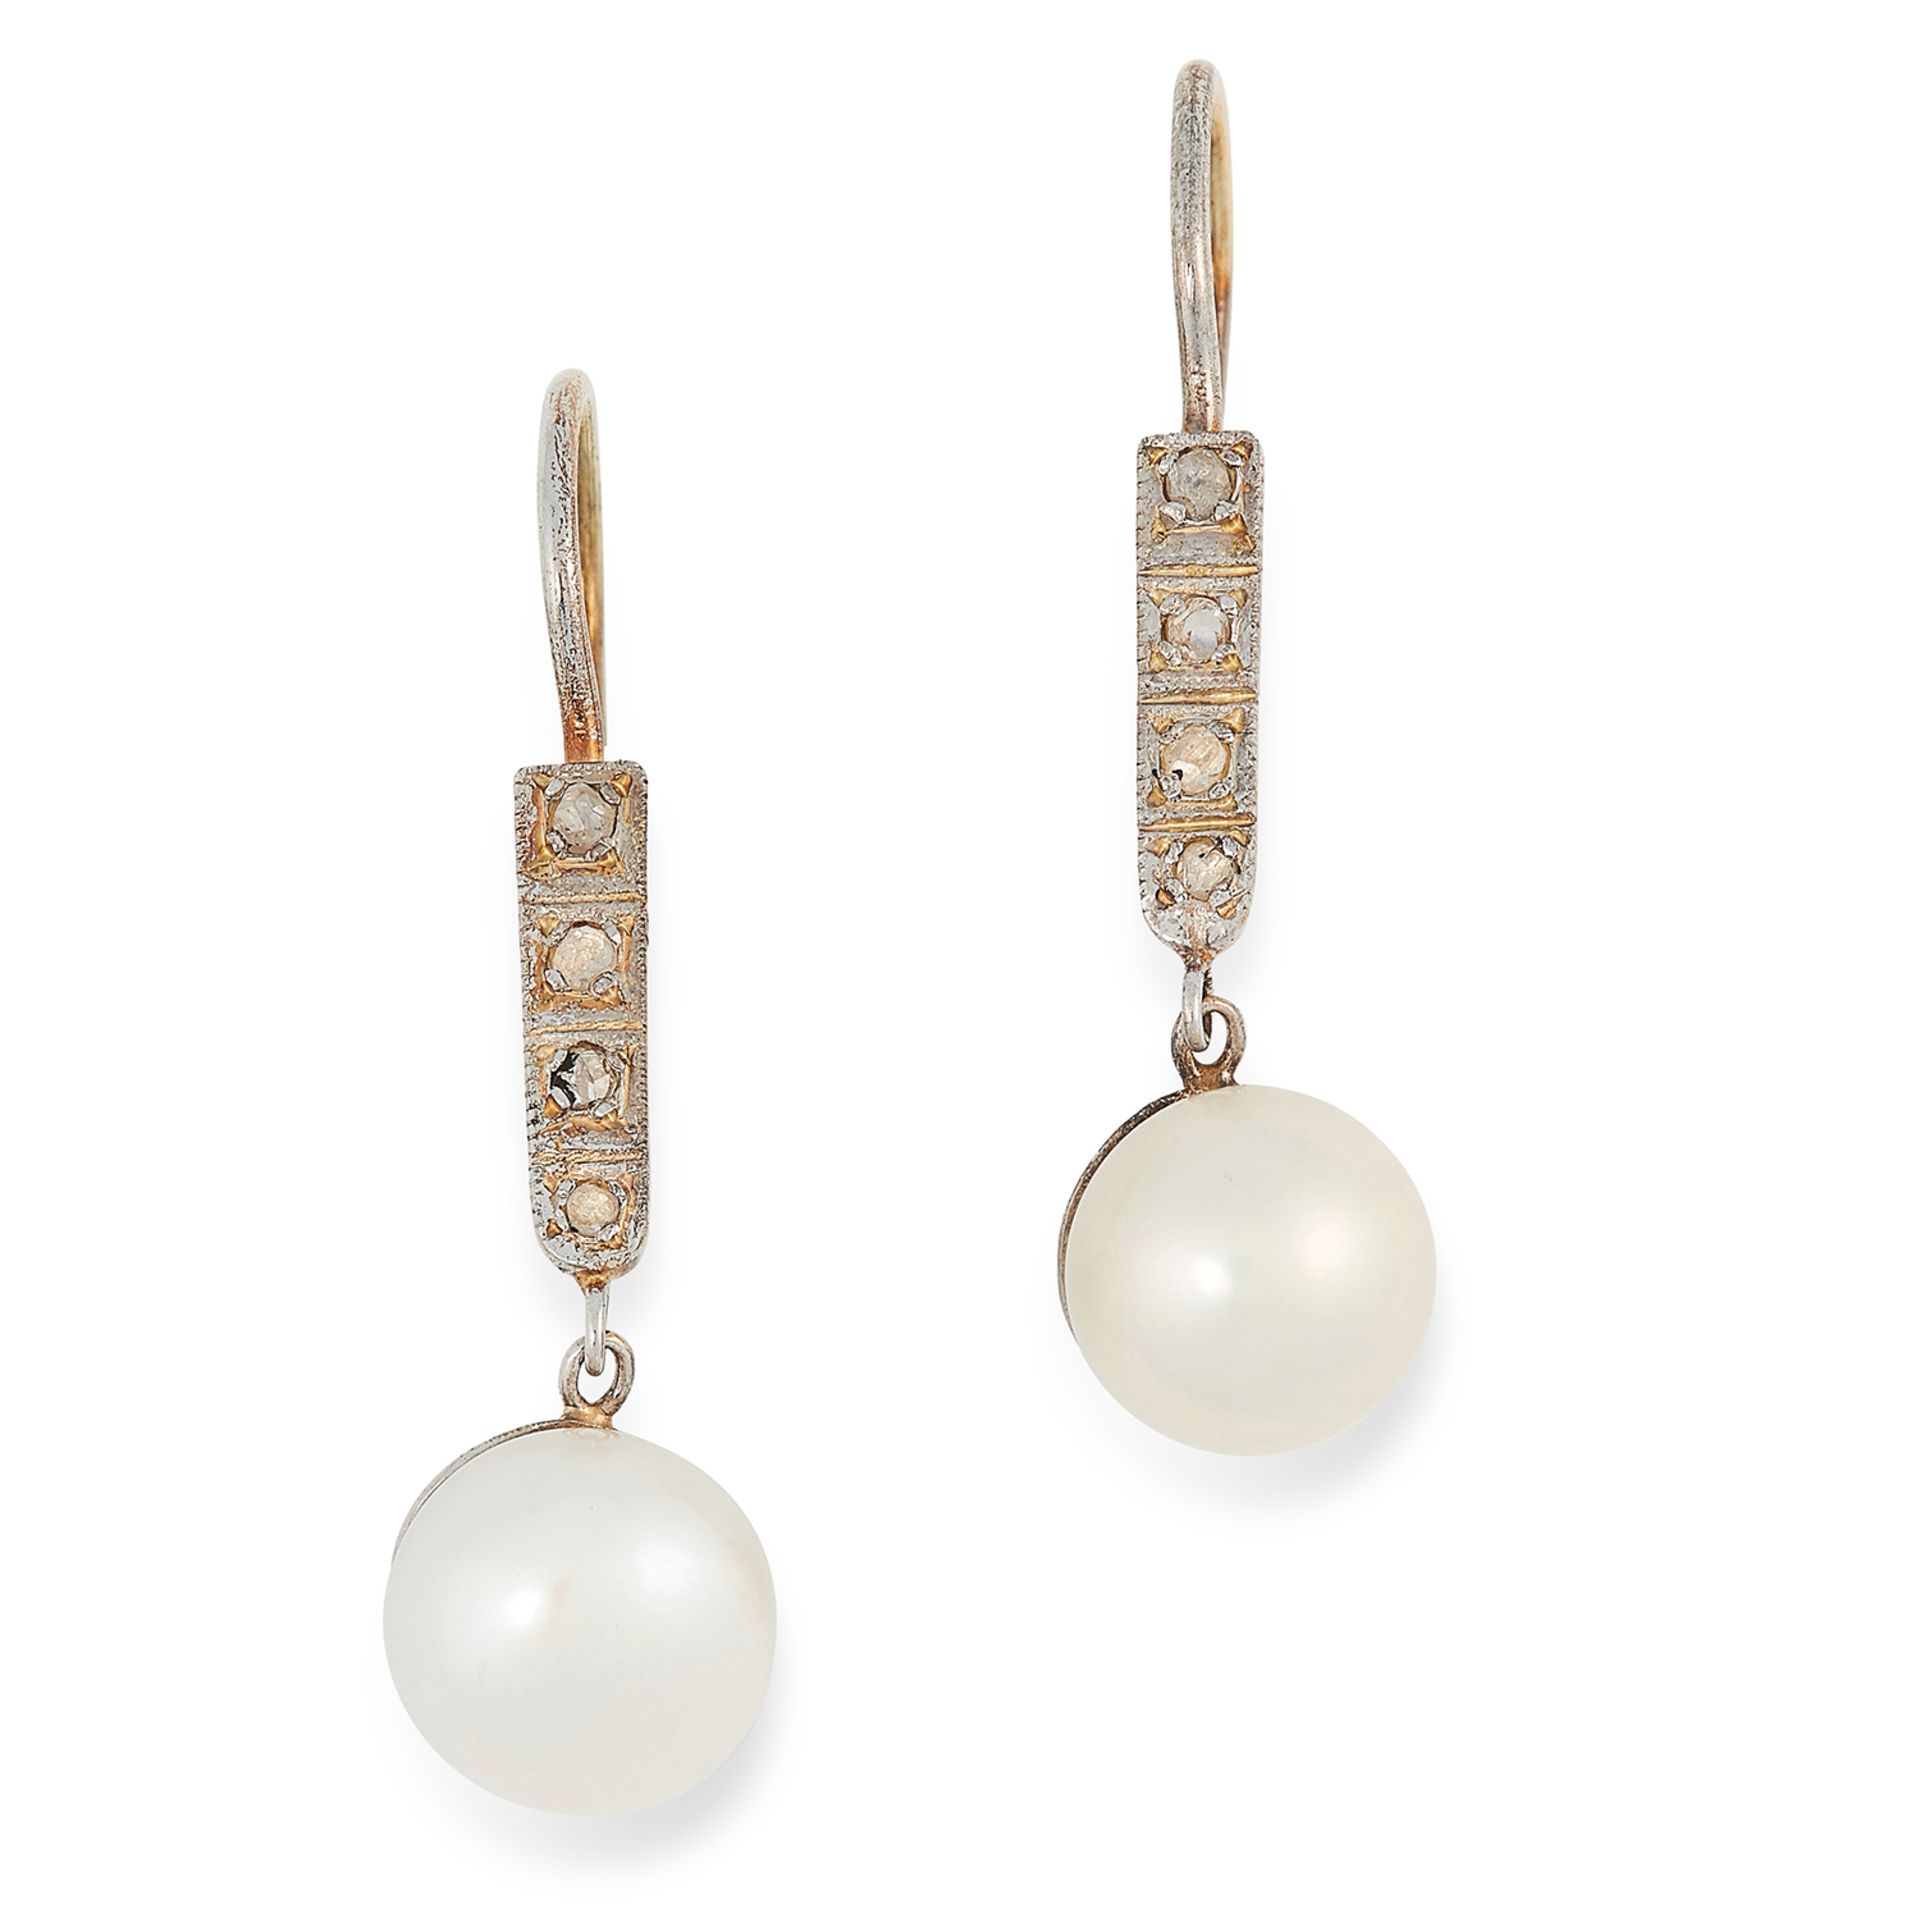 PEARL AND DIAMOND DROP EARRINGS each set with a row of round cut diamonds suspending a pearl drop,